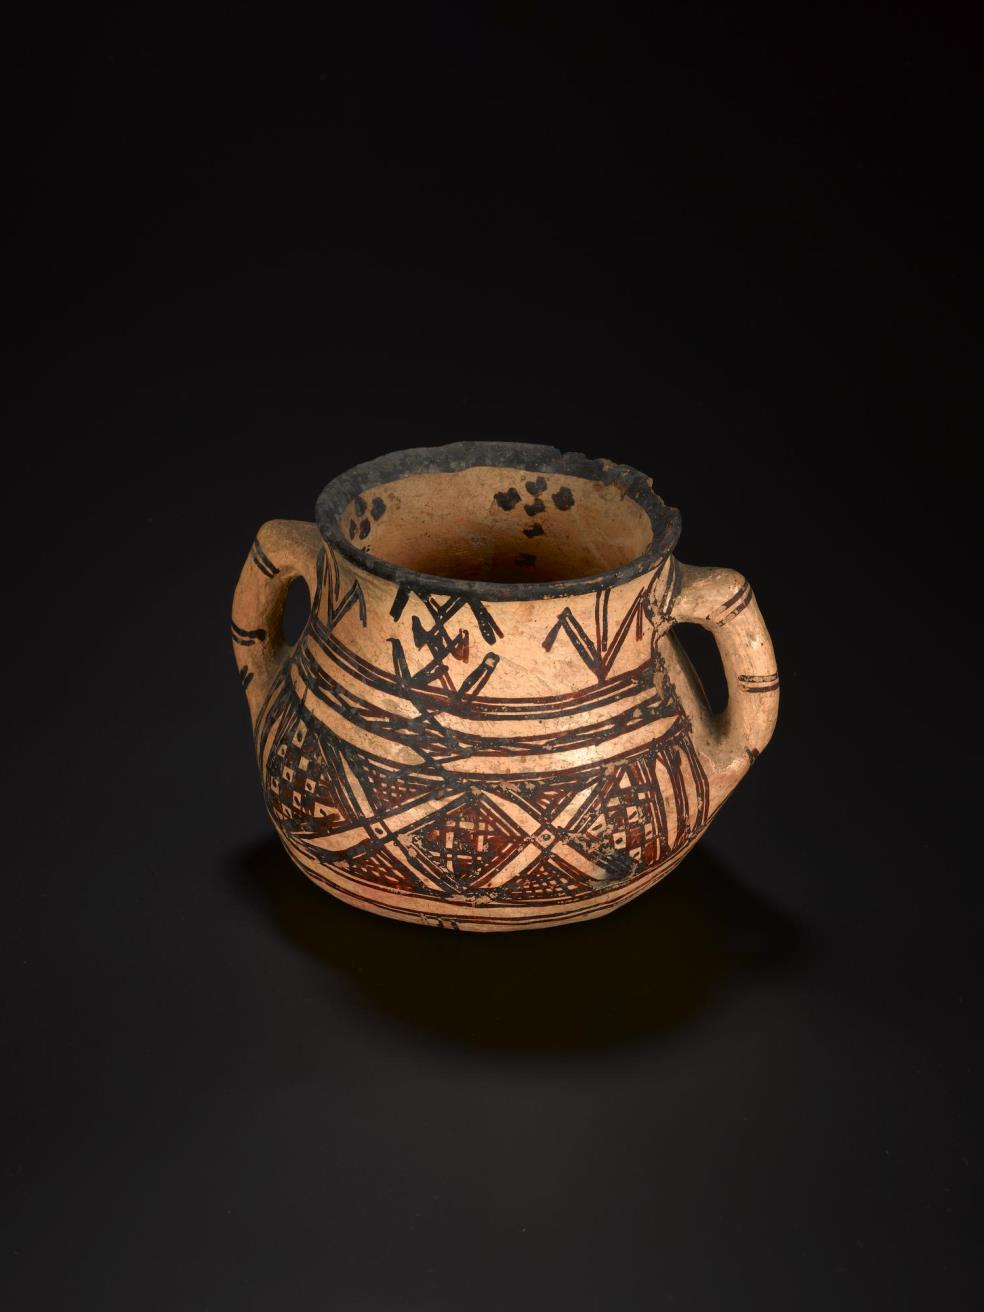 Two-handled milk pot (hallab), made by Imazighen women for domestic use, c1850-1886. One of eight high-quality slip-glazed earthenware vessels in Drummond Hay’s collection from the Rif Mountains. 